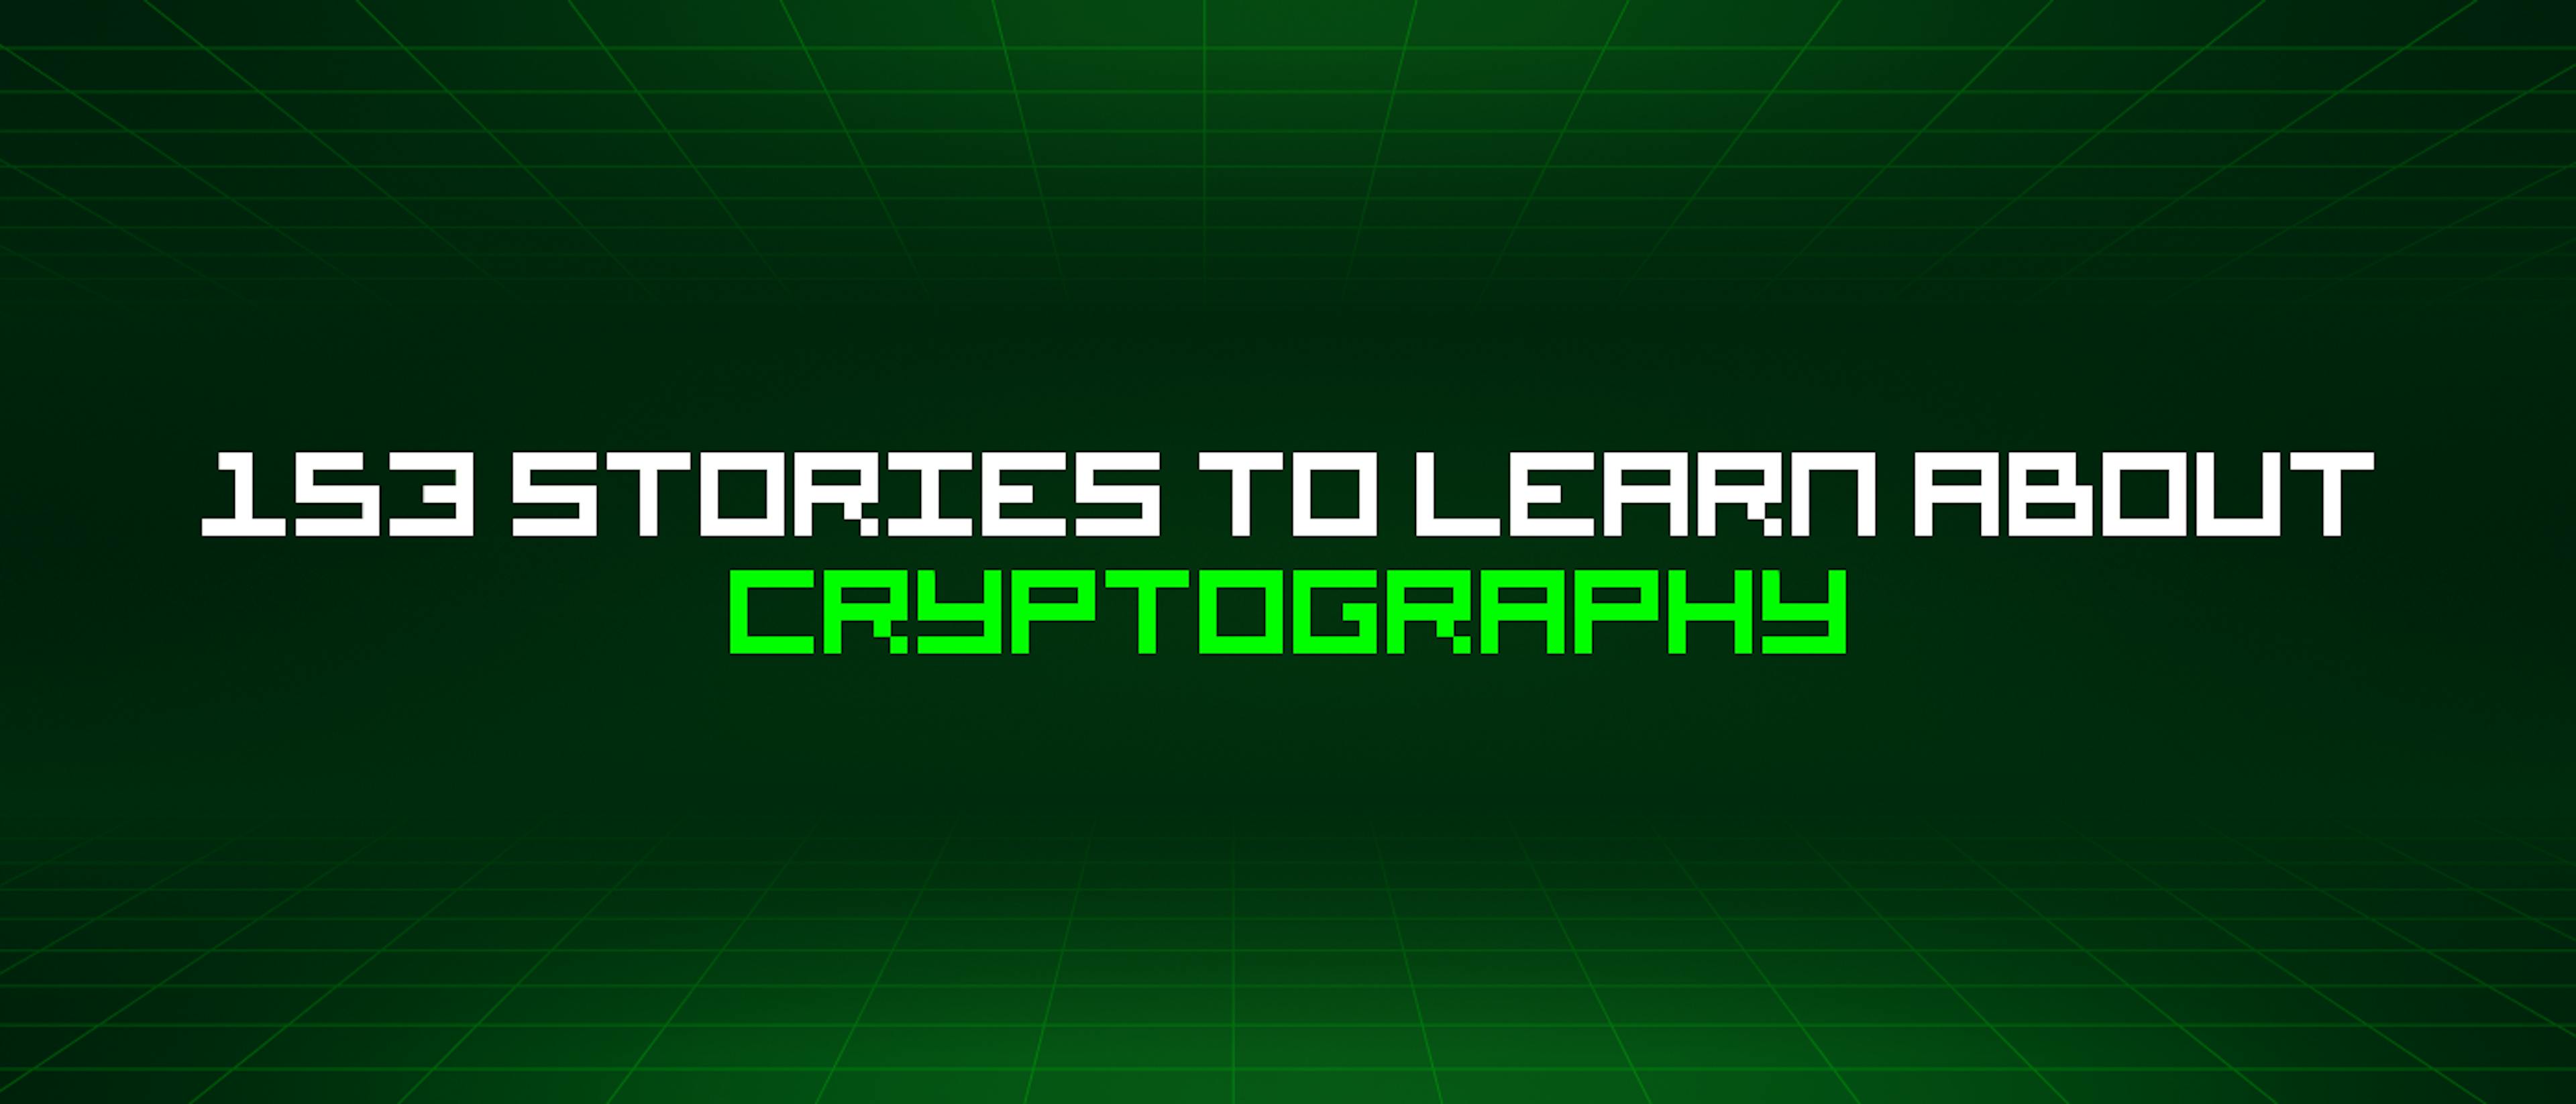 featured image - 153 Stories To Learn About Cryptography